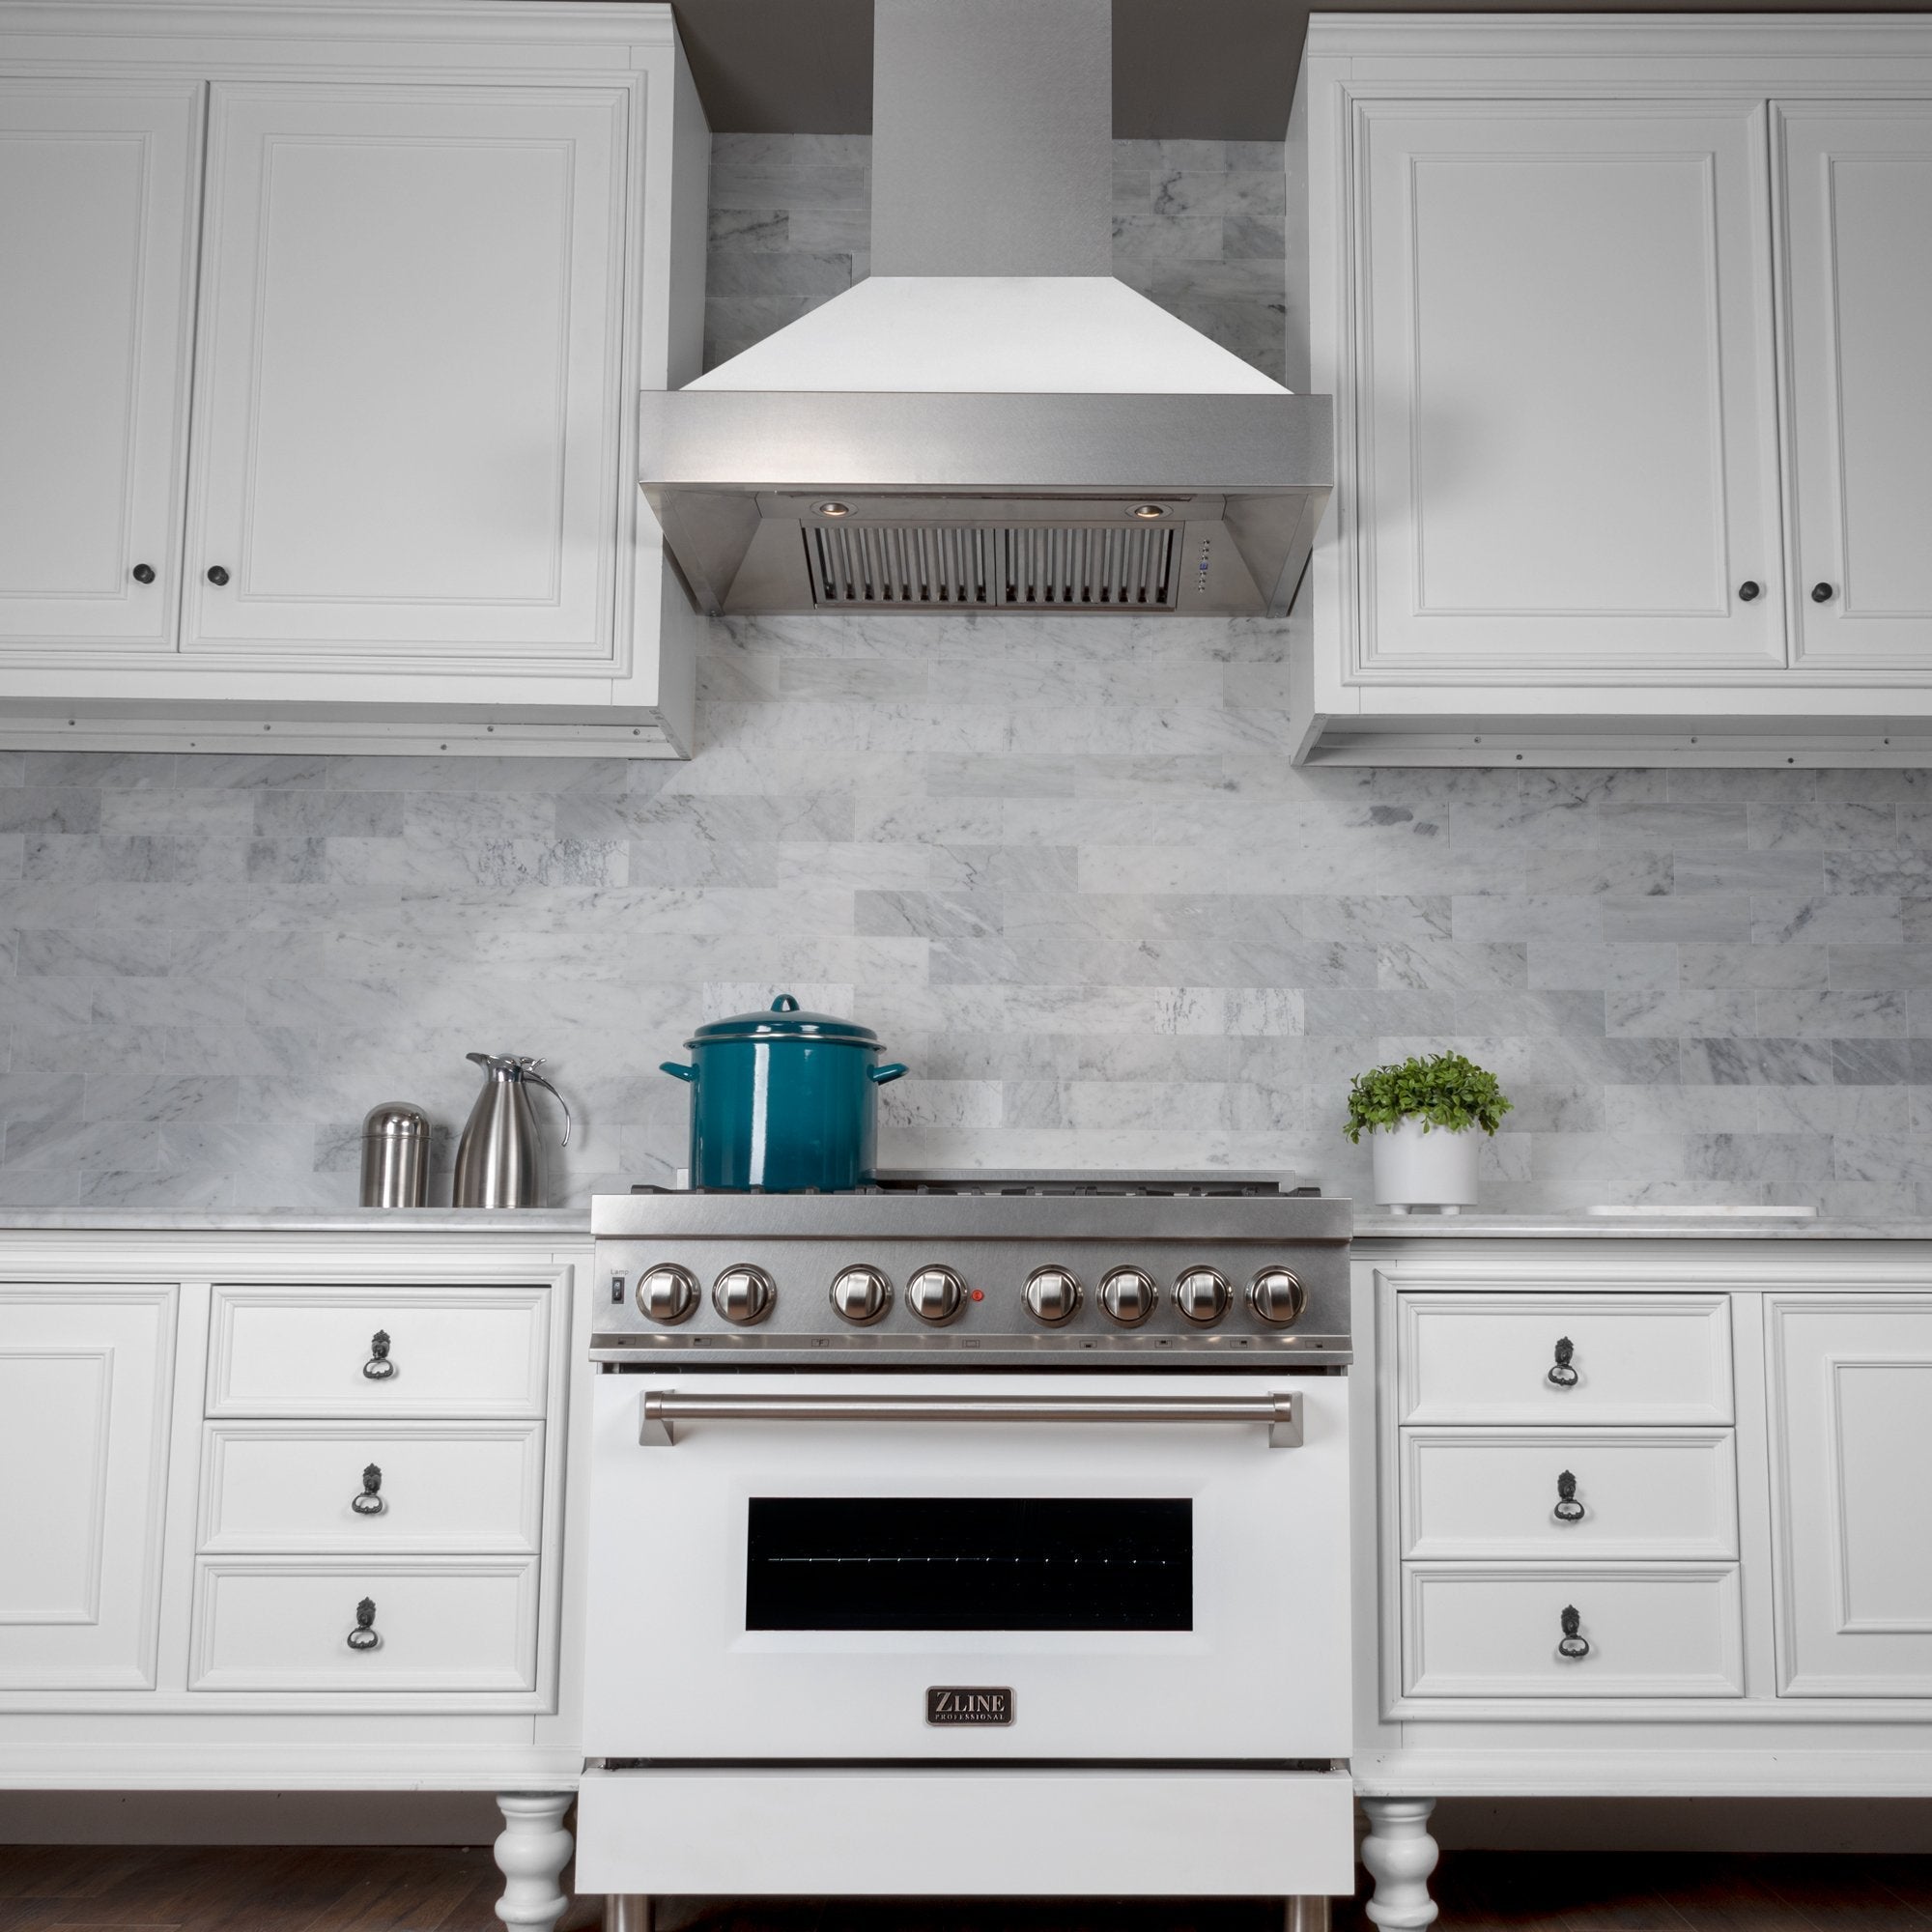 ZLINE Fingerprint Resistant Stainless Steel Range Hood With White Matte Shell (8654WM) with a short chimney above a matching kitchen range from under.